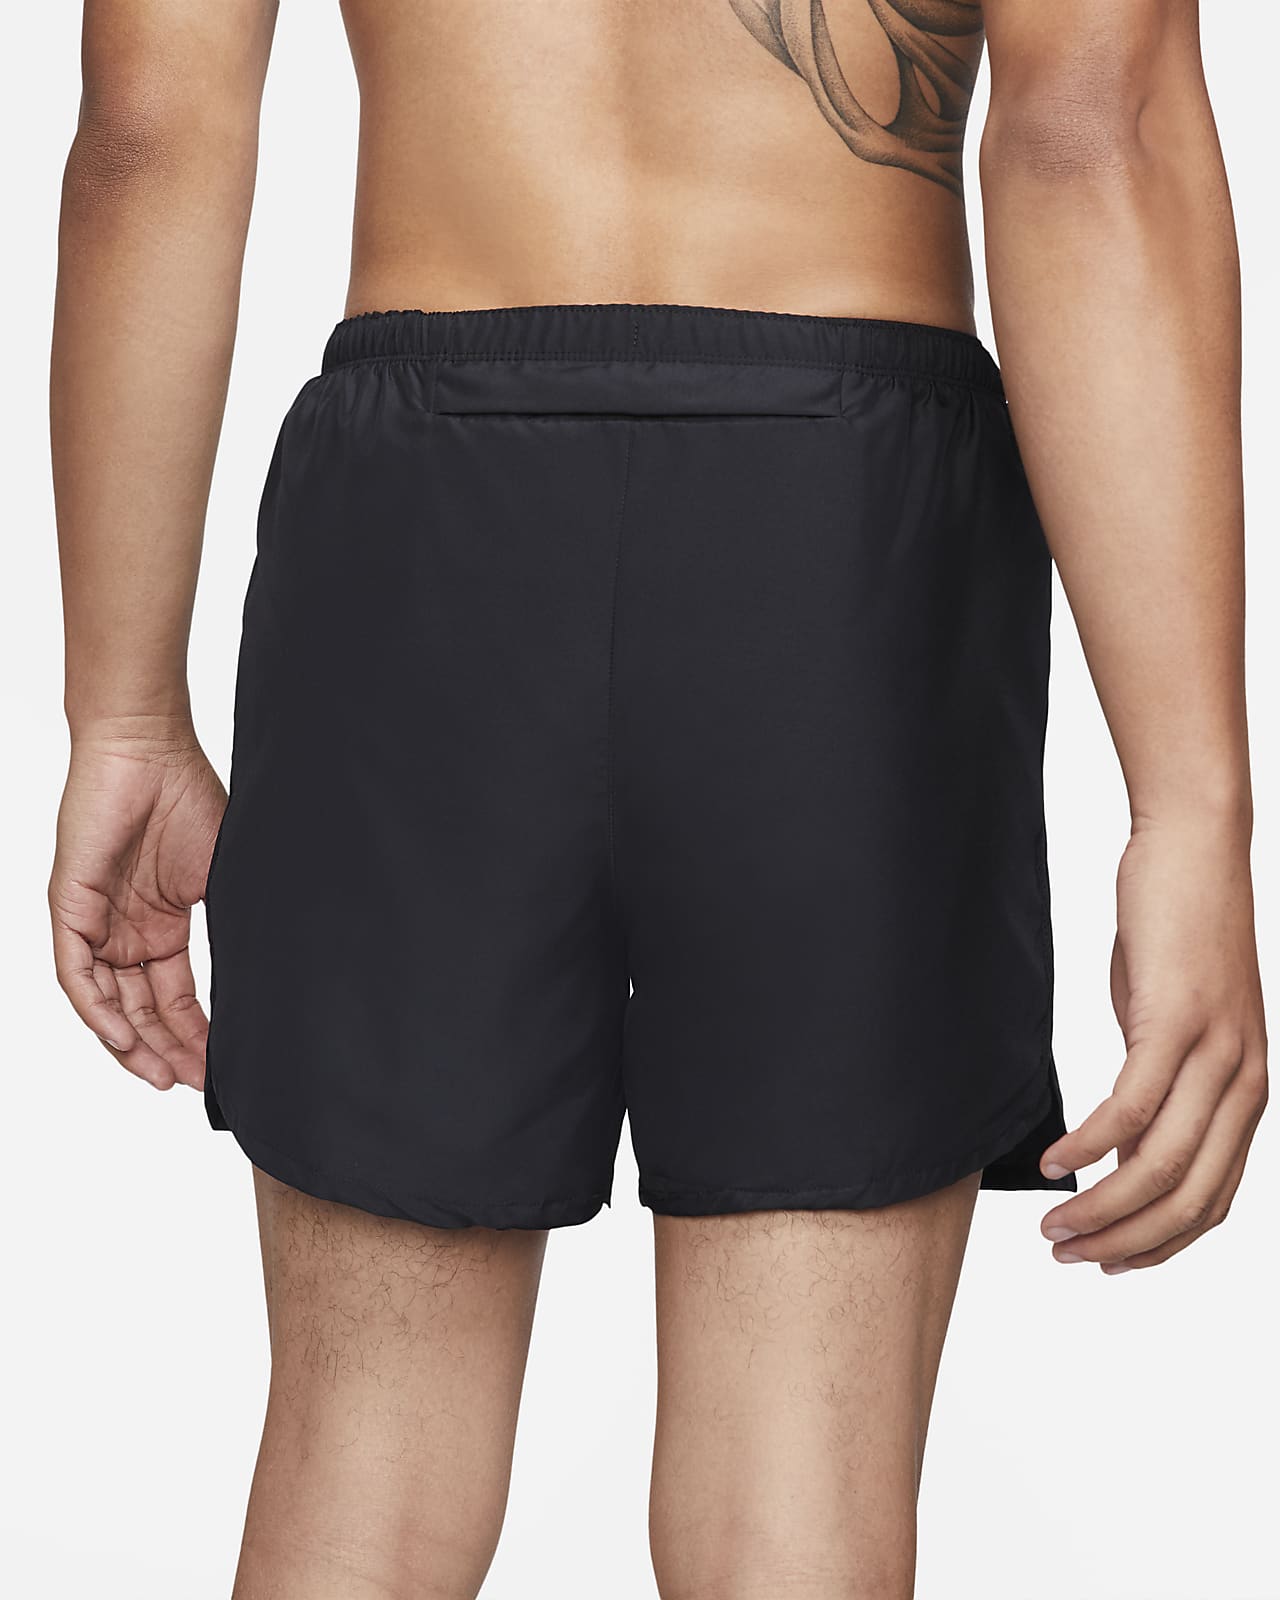 nike running shorts with boxer brief liner